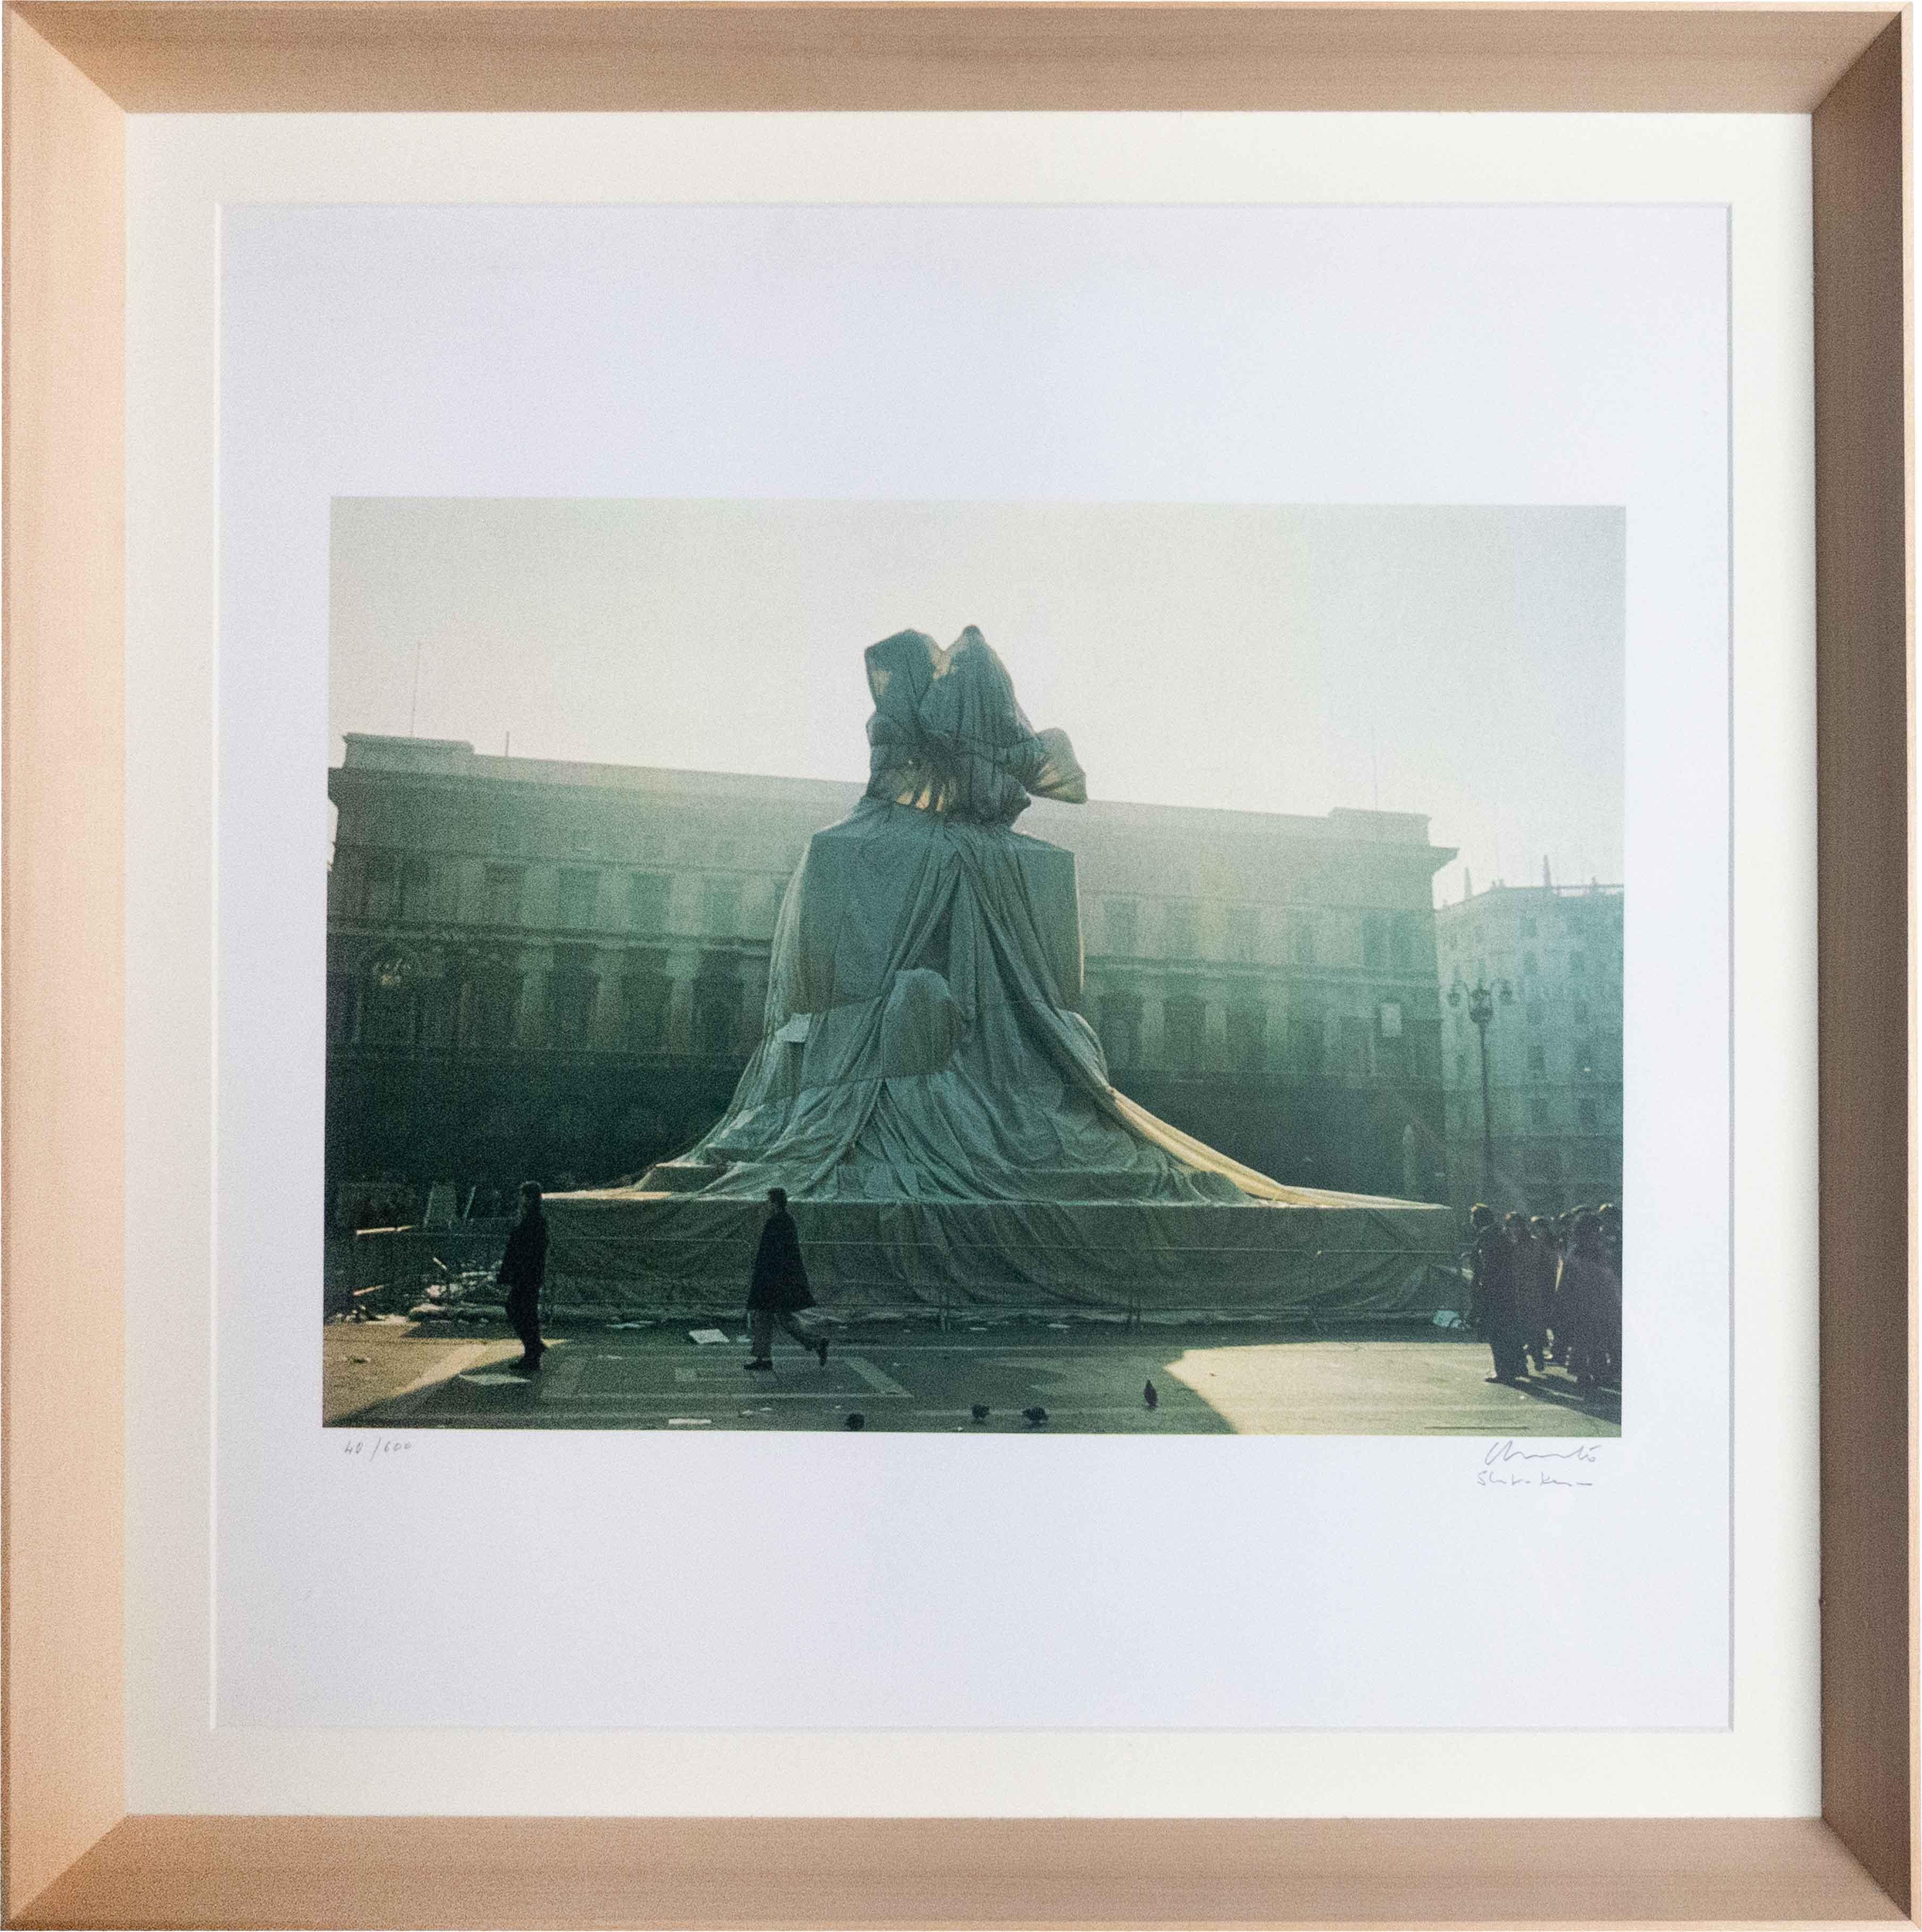 Wrapped Monument to Victor Emmanuel, 1973, Photolithography, Land Art - Photograph by Christo and Jeanne-Claude